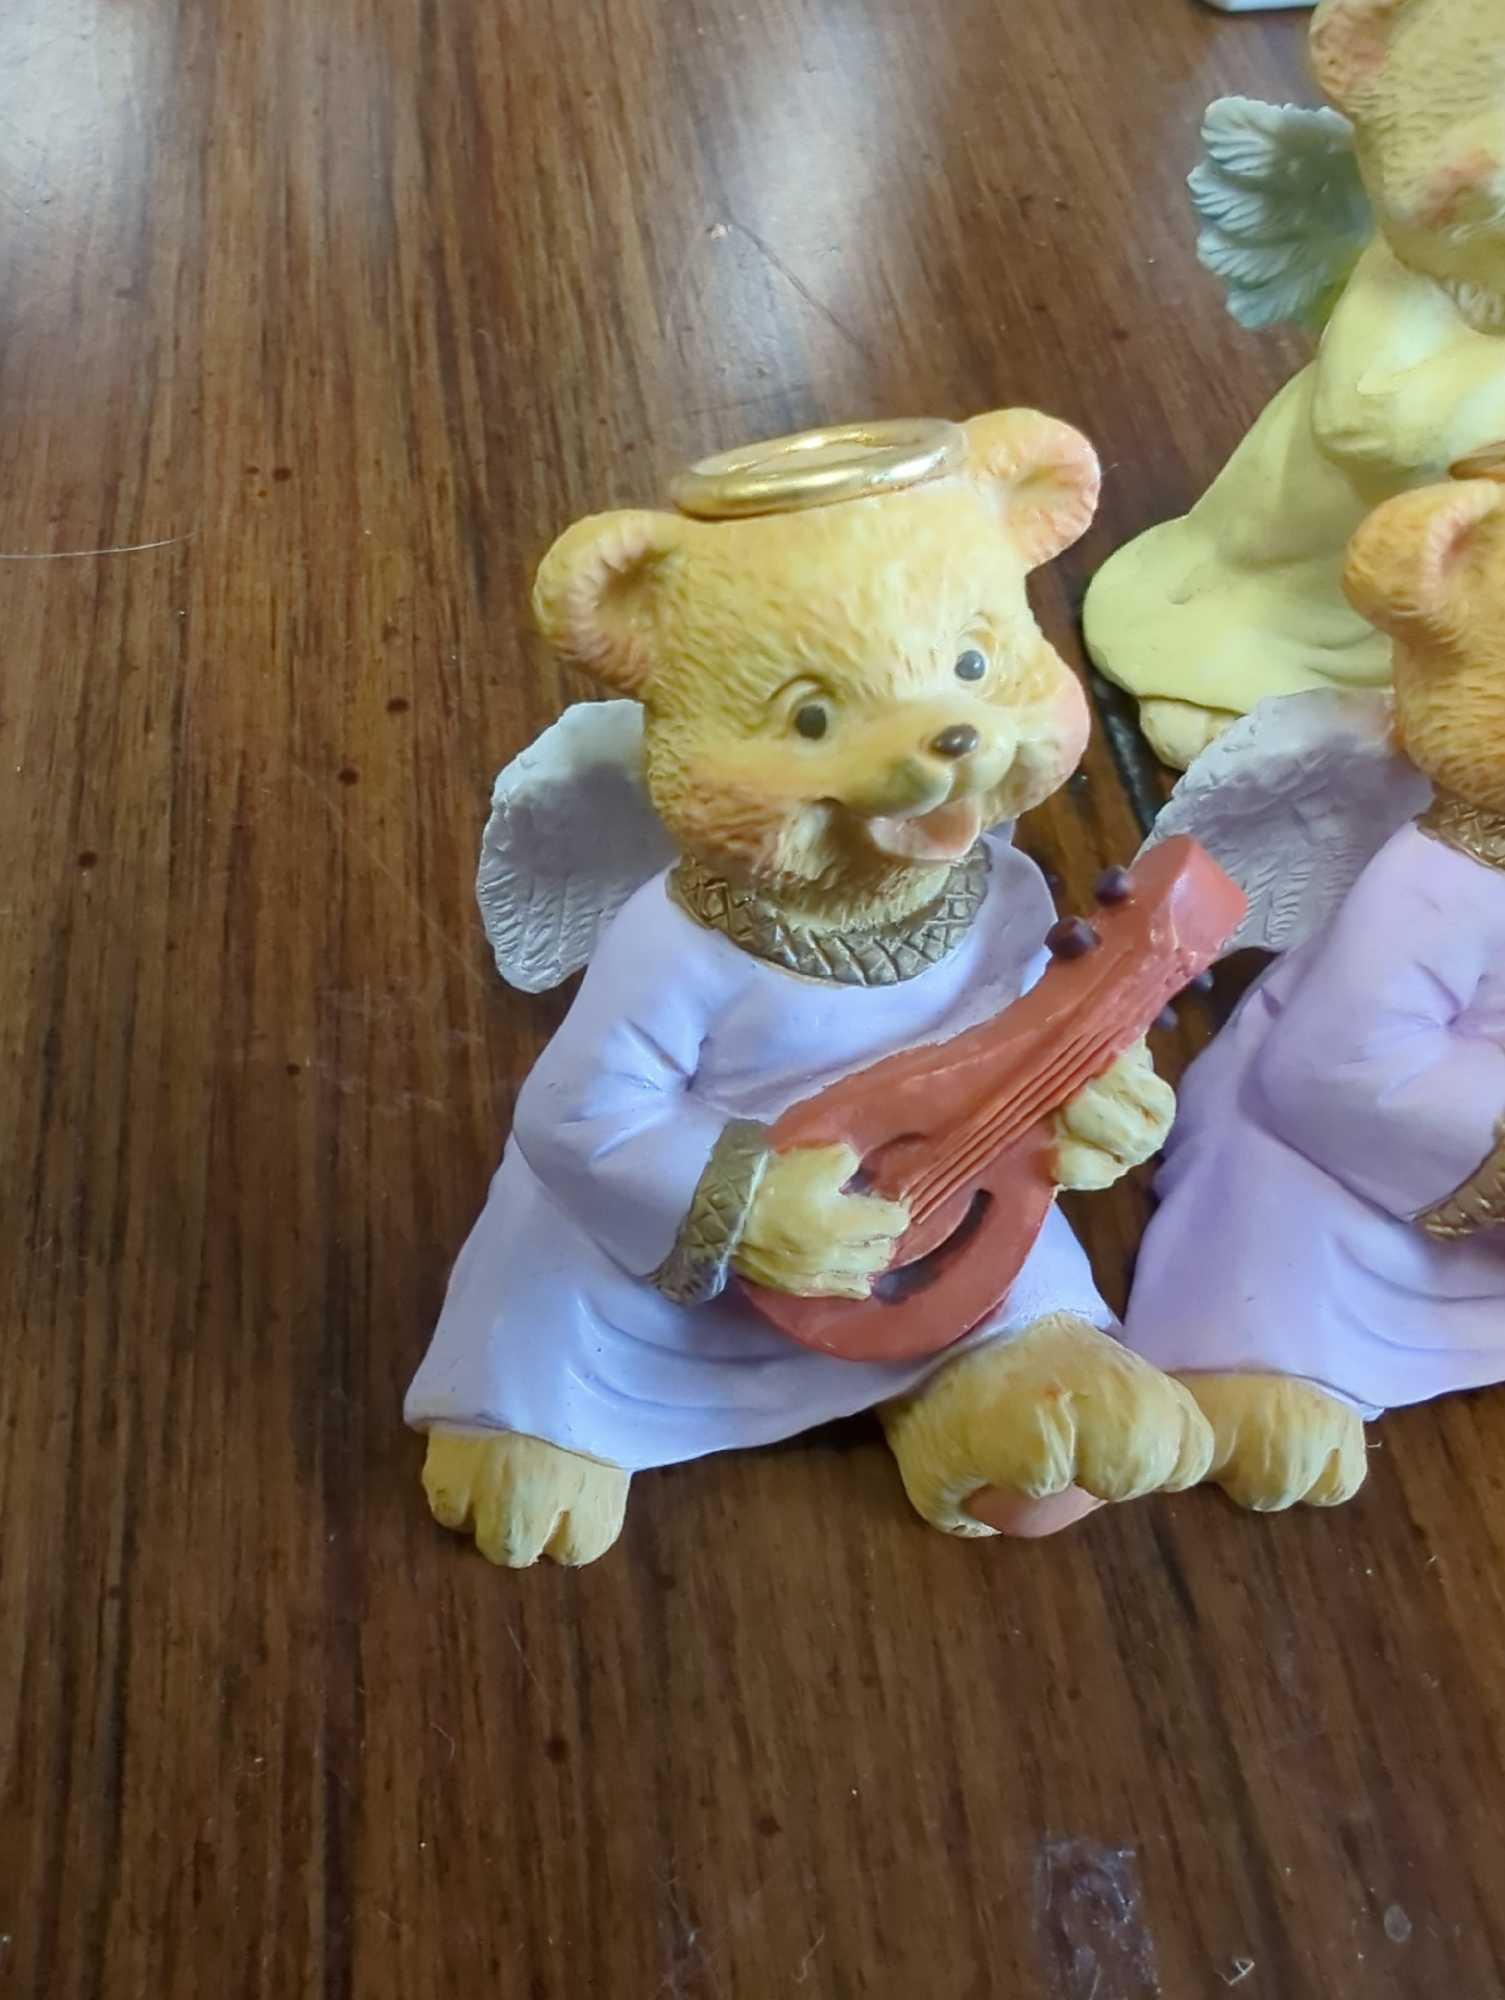 Lot of 7 vintage Angel Teddy Babies Figurines. Comes as is shown in photos. Appears to be used.